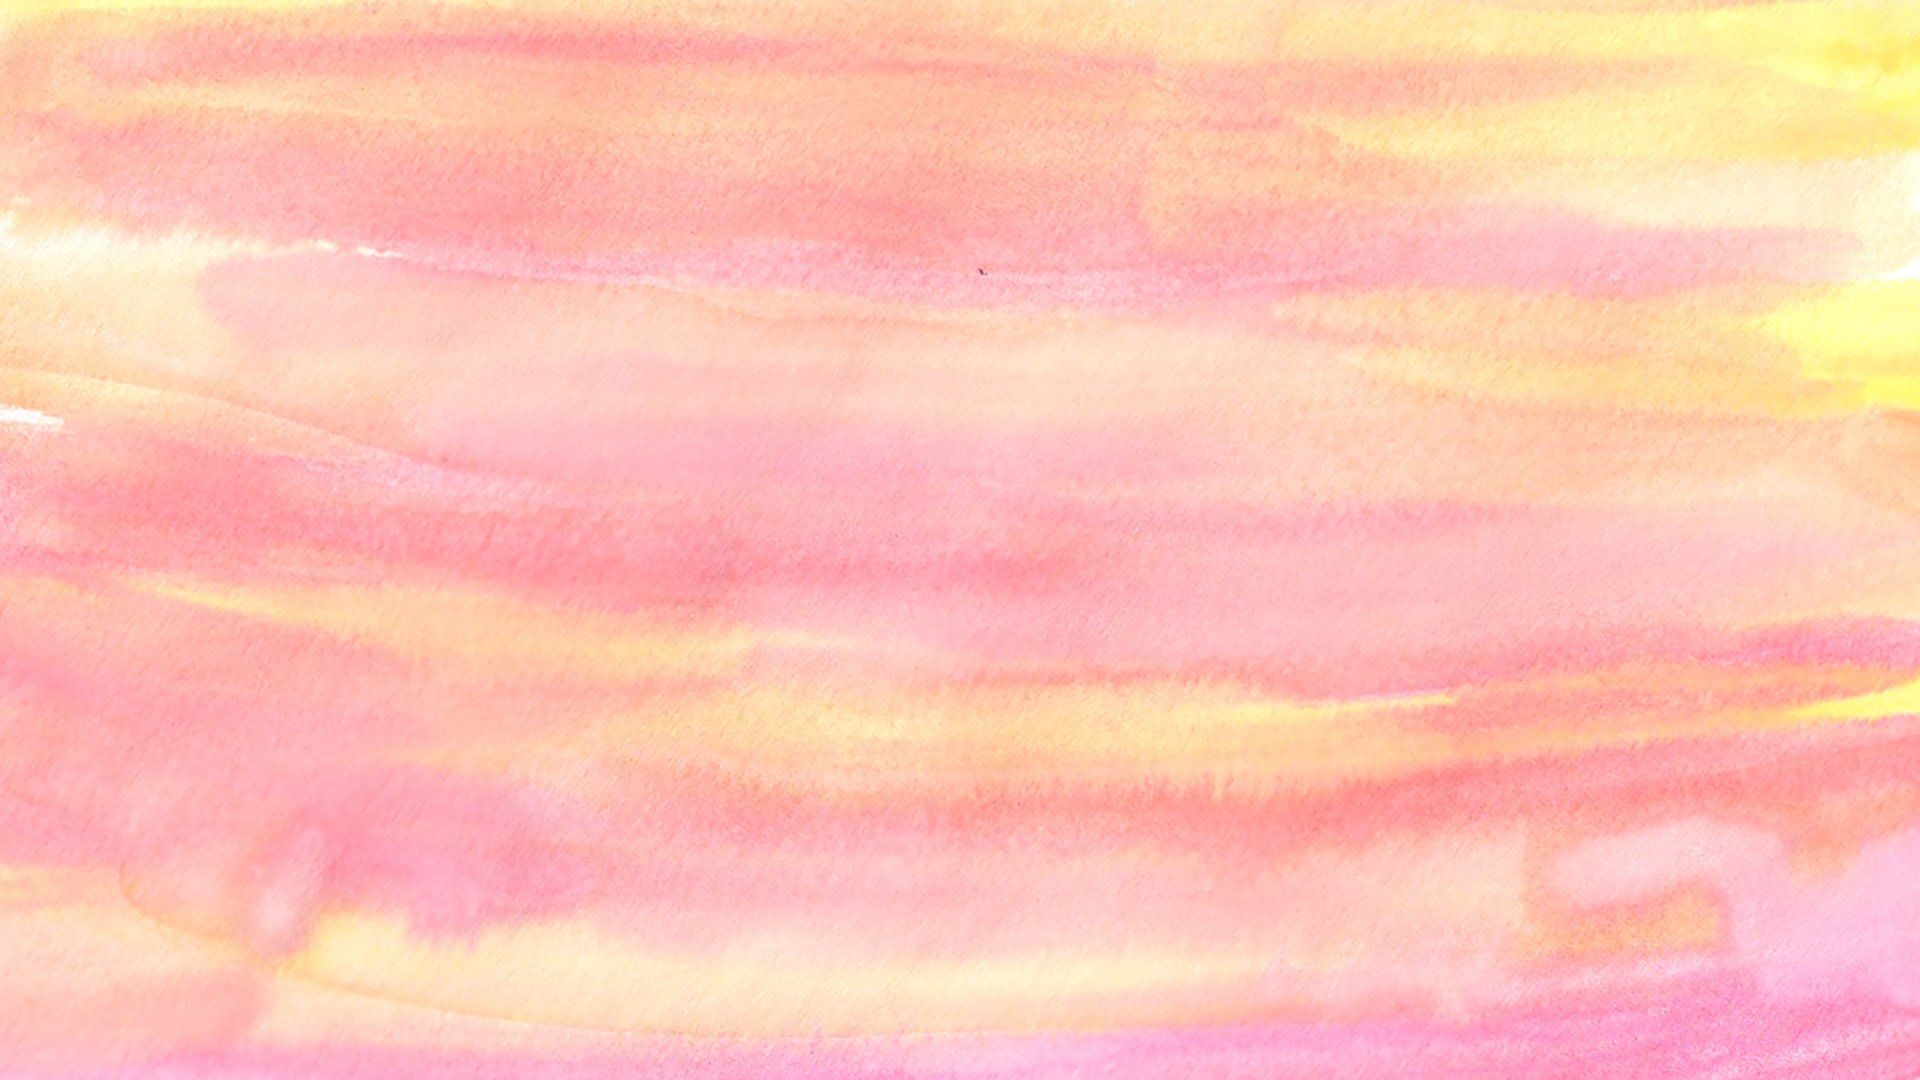 A watercolor background with a mix of pink and yellow colors - Pastel